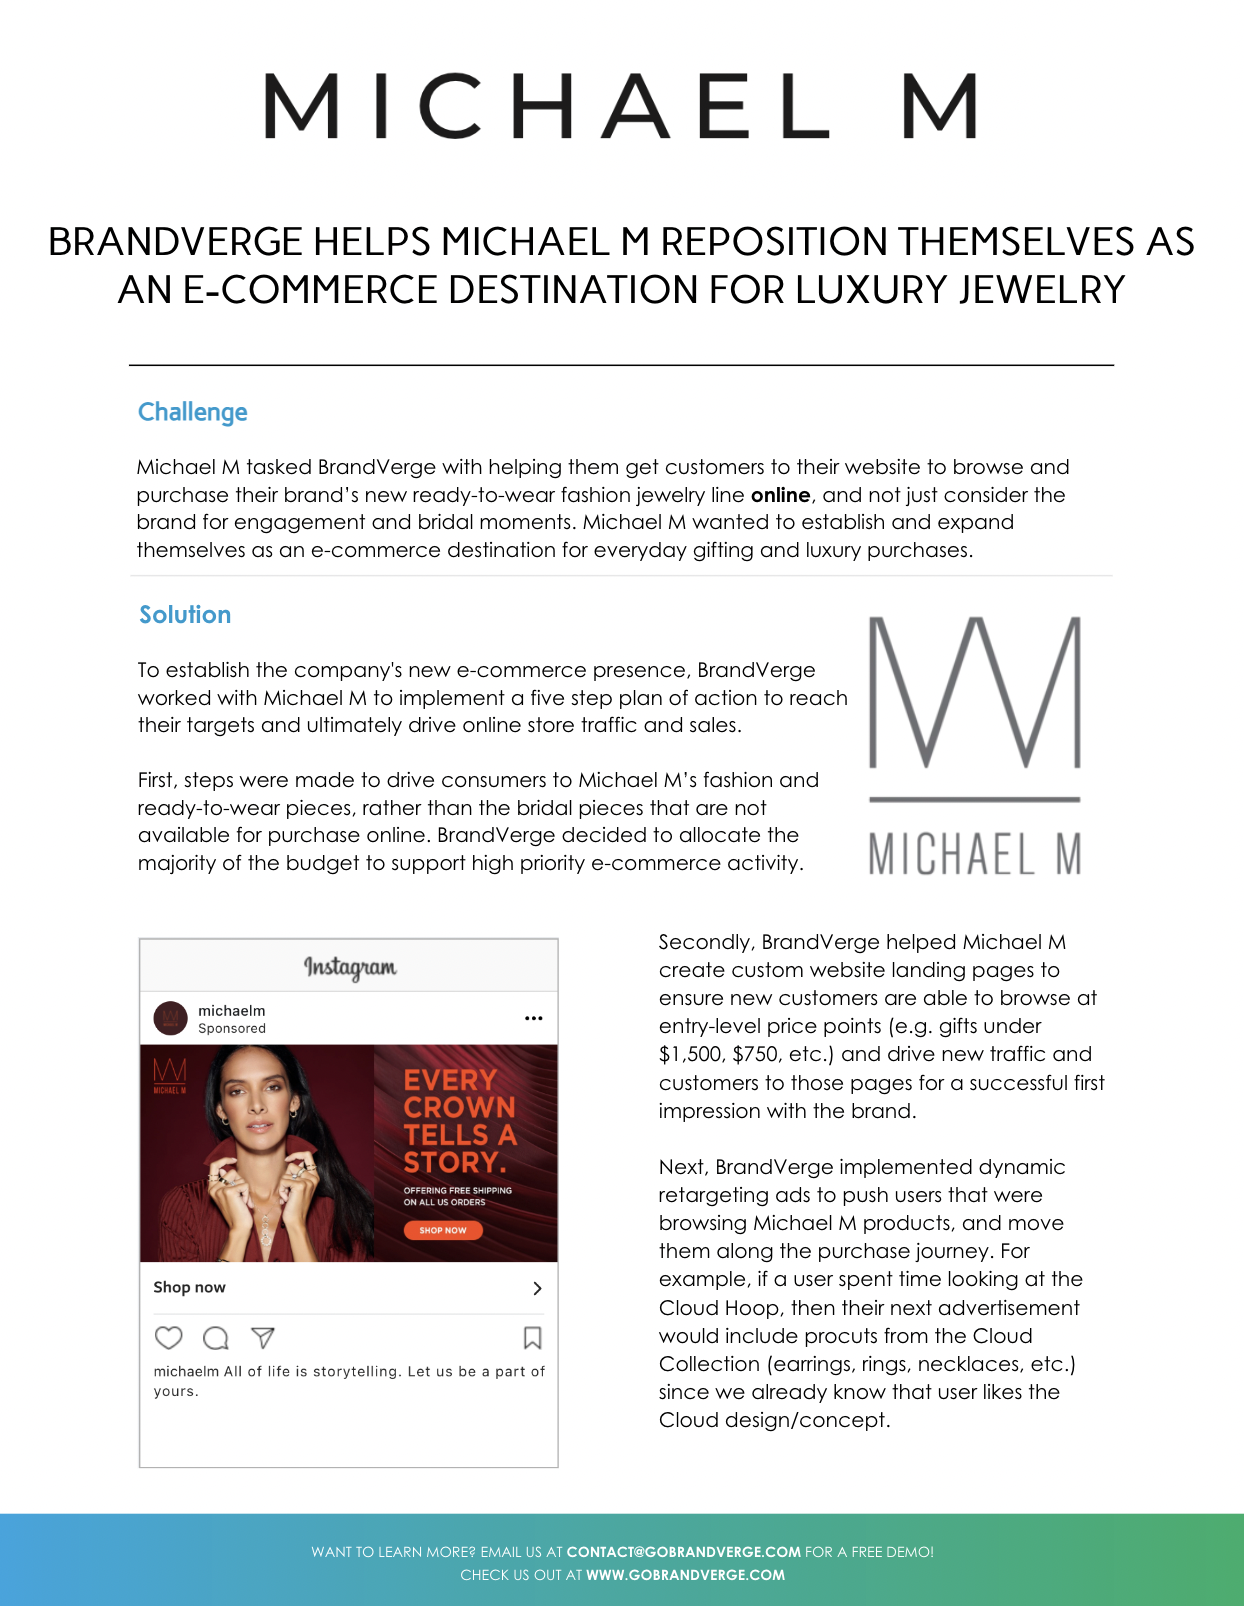 BRANDVERGE HELPS MICHAEL M REPOSITION THEMSELVES AS AN E-COMMERCE DESTINATION FOR LUXURY JEWELRY